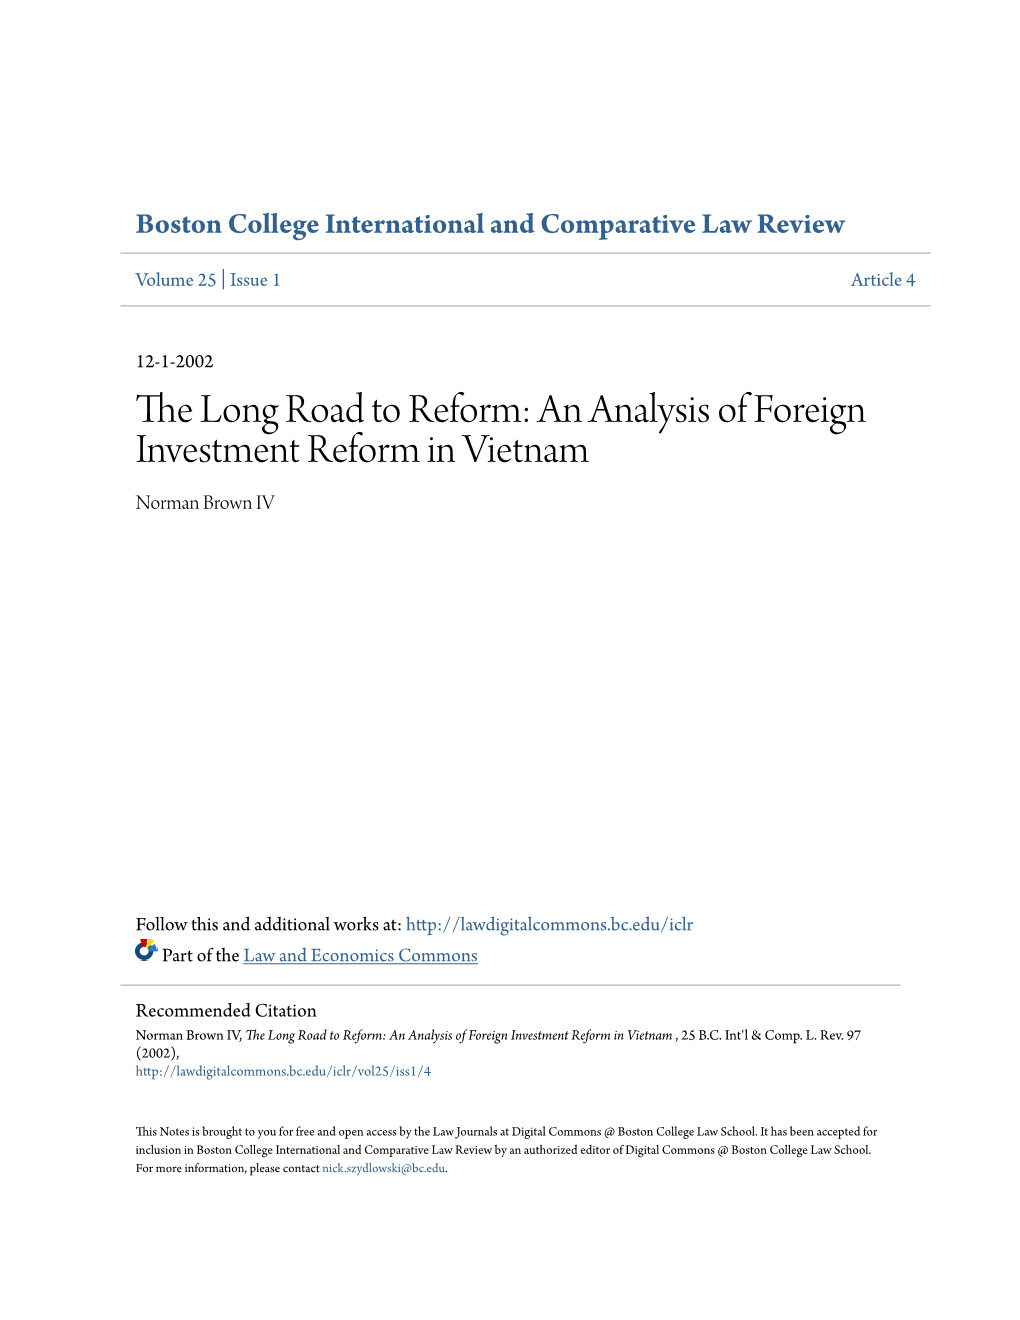 An Analysis of Foreign Investment Reform in Vietnam Norman Brown IV